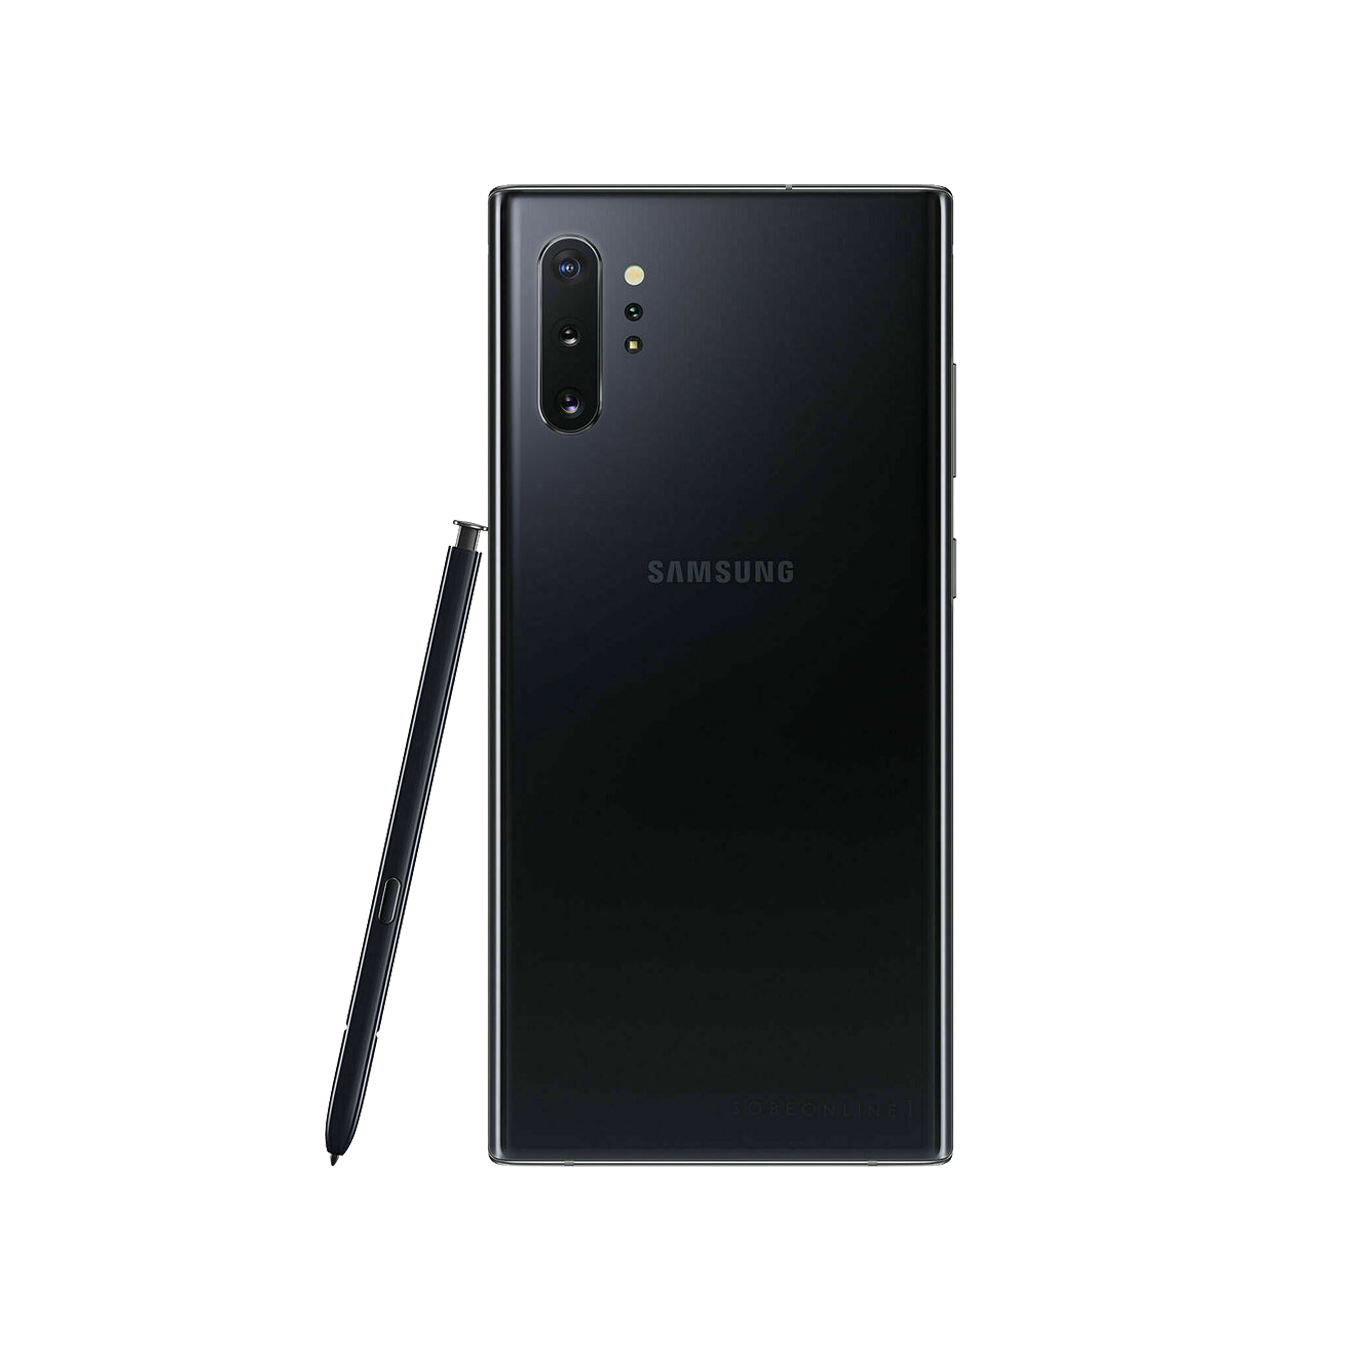 Samsung Galaxy Note 10 Plus network unlock, remove SIM restrictions for global use, available at cleanimei.com